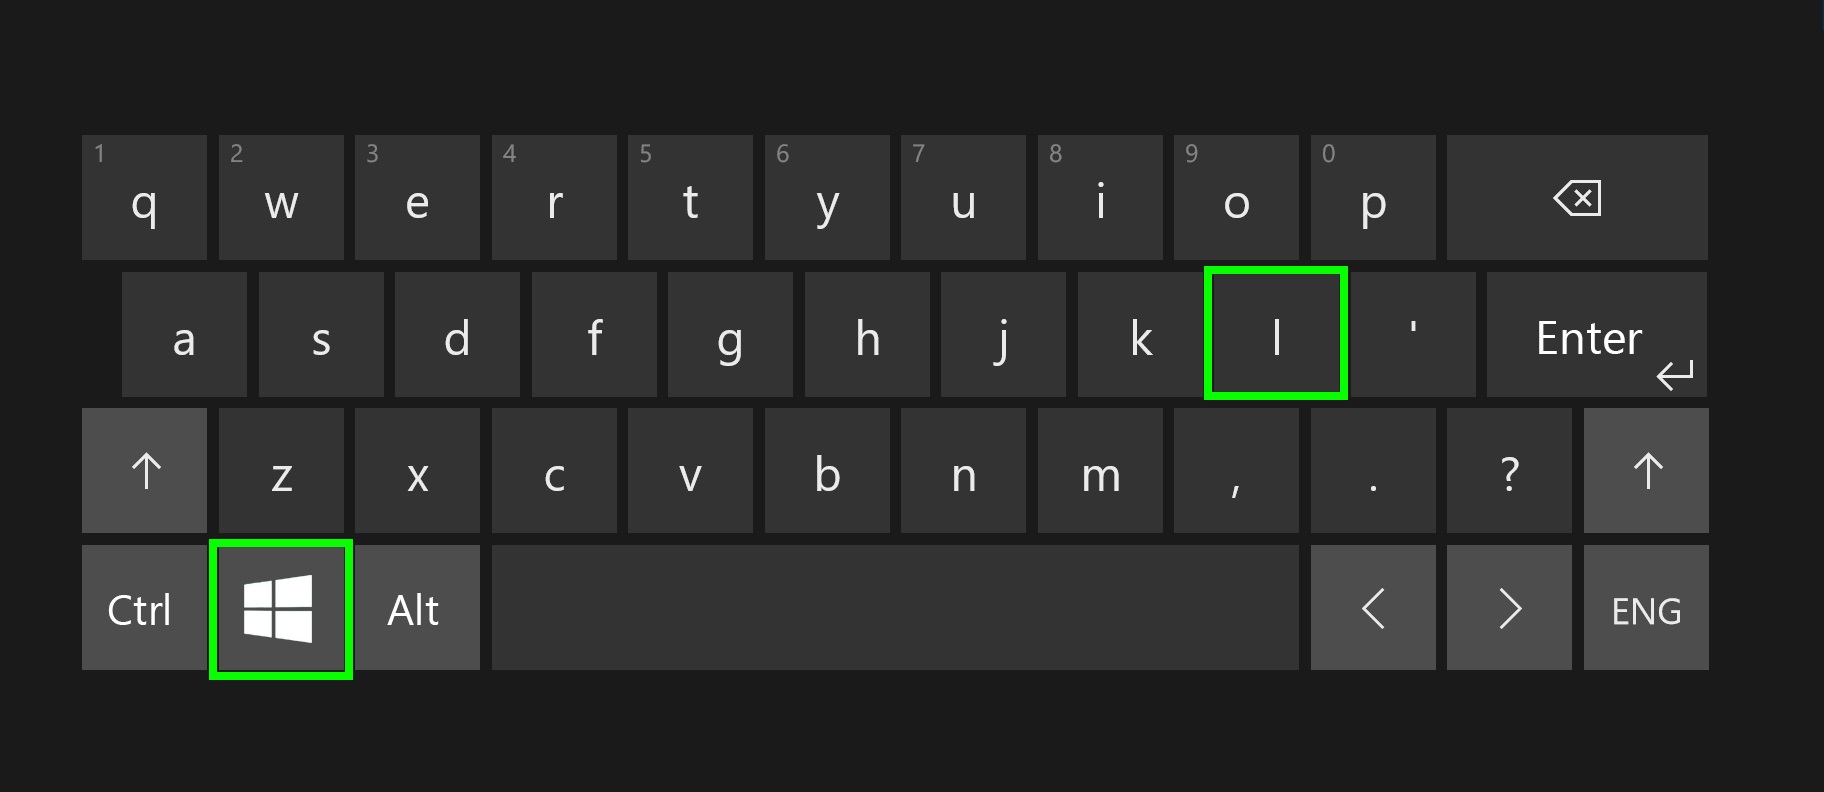 keyboard with Win Lock key highlighted